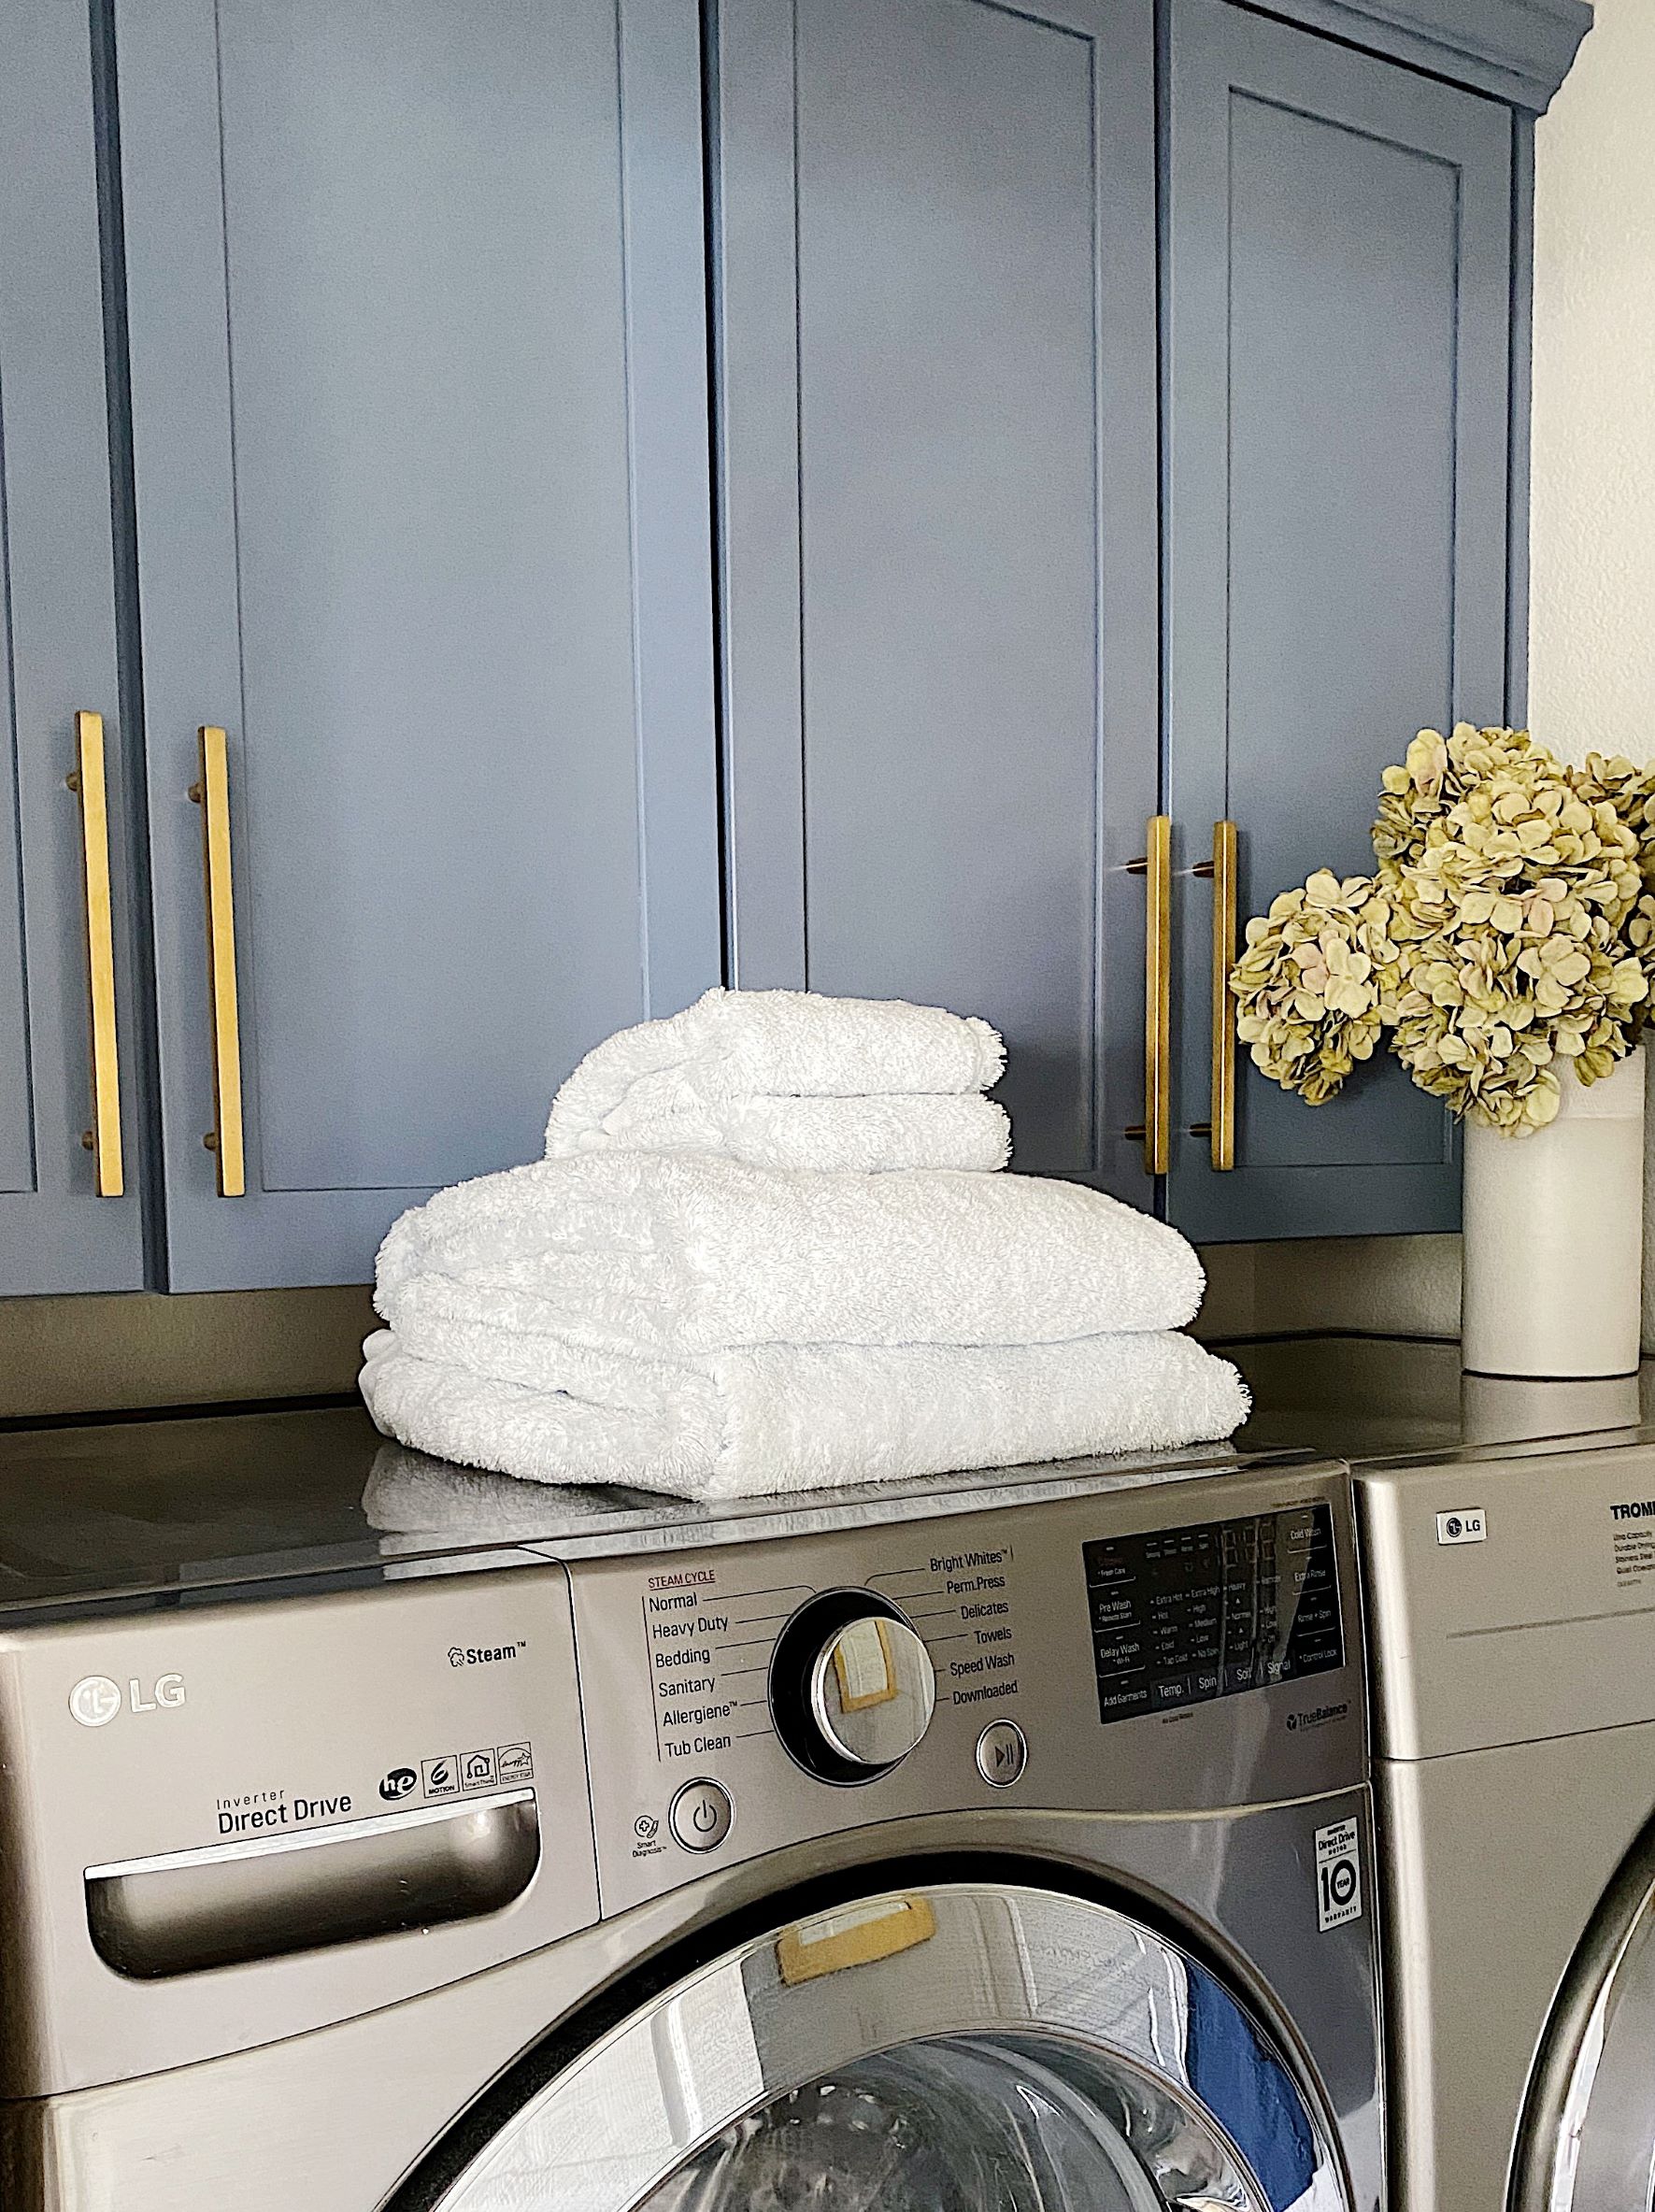 Our laundry room cabinets are painted with Bracing Blue by Sherwin Williams - jane at home